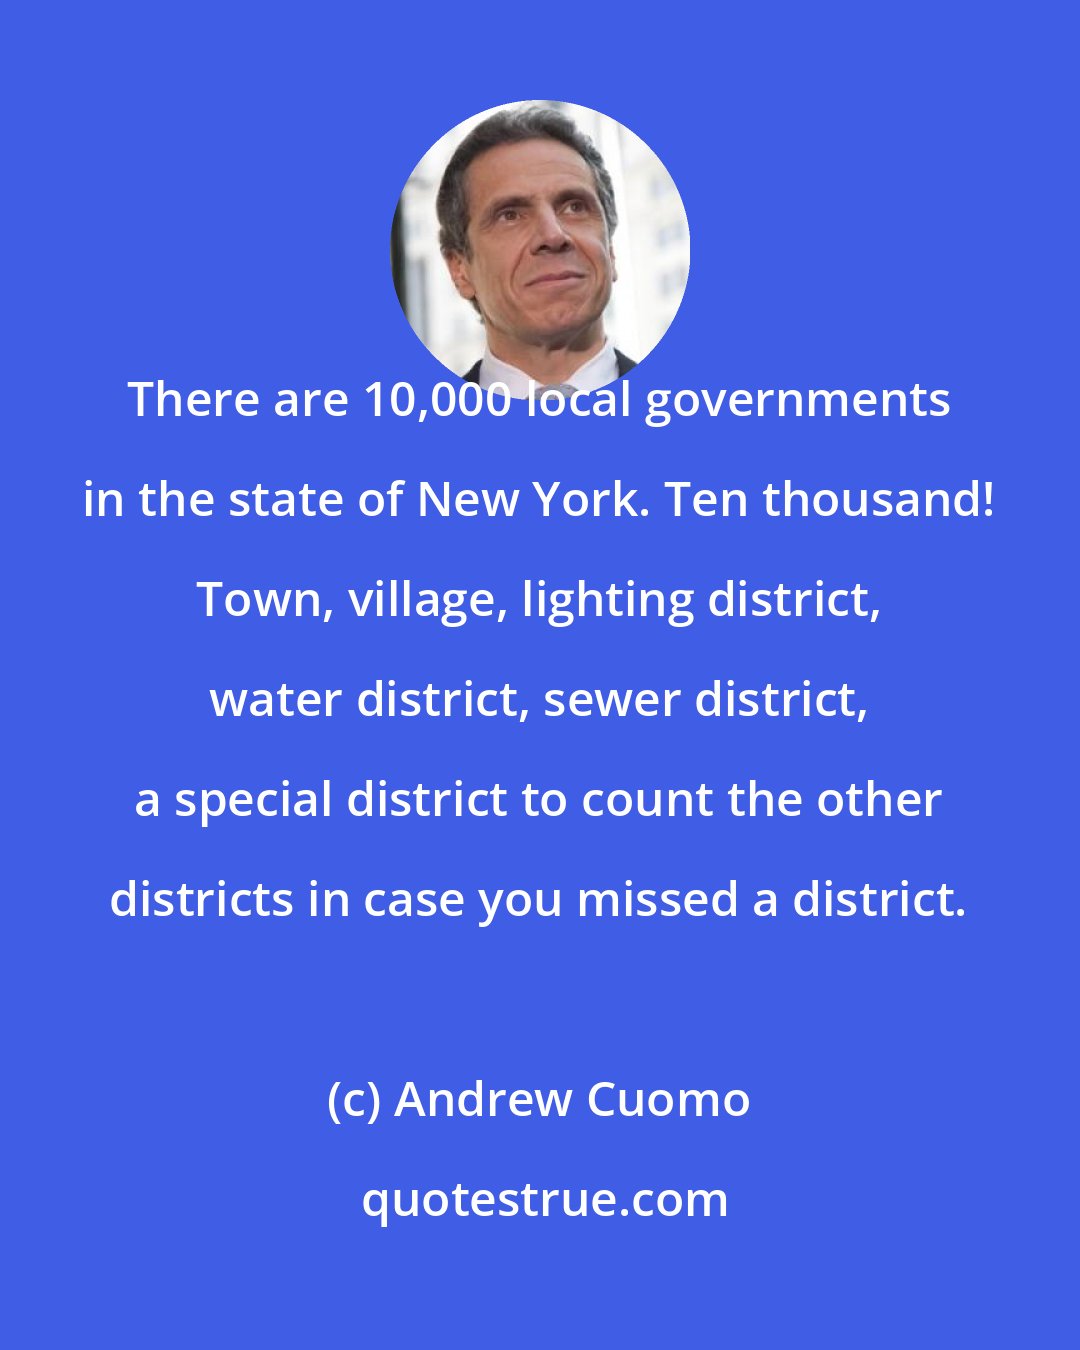 Andrew Cuomo: There are 10,000 local governments in the state of New York. Ten thousand! Town, village, lighting district, water district, sewer district, a special district to count the other districts in case you missed a district.